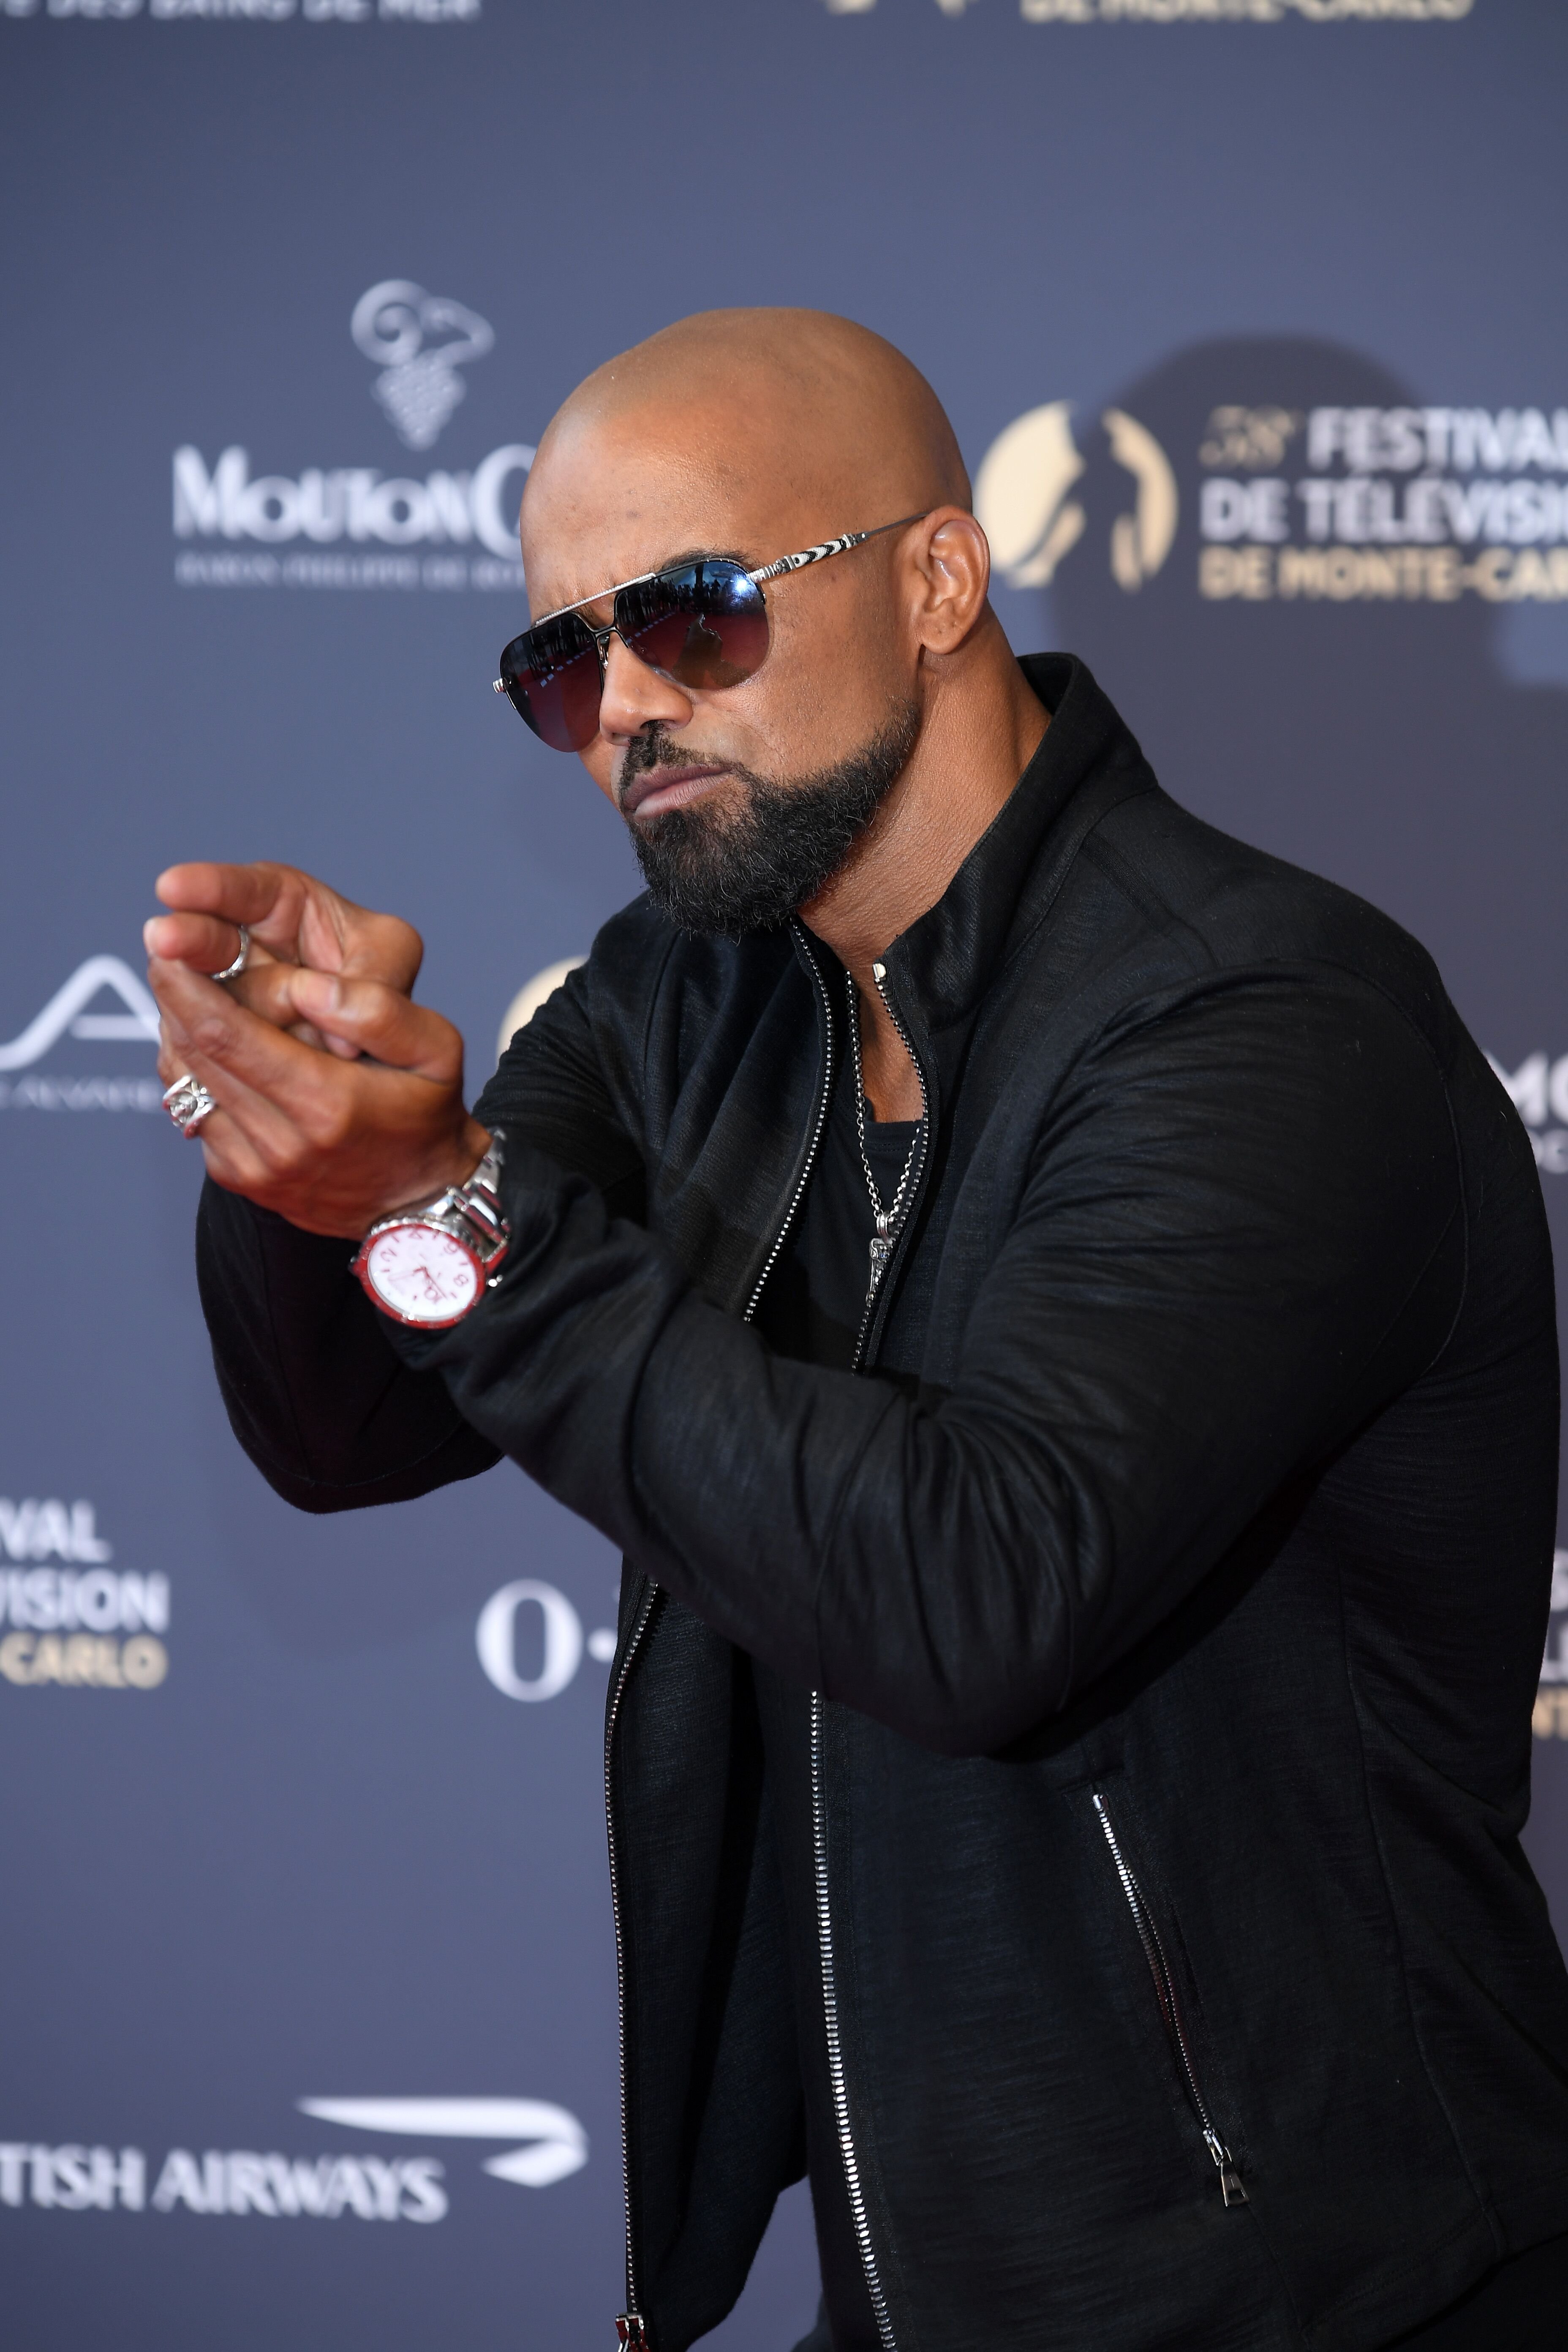 Shemar Moore attends the opening ceremony of the 58th Monte Carlo TV Festiv...